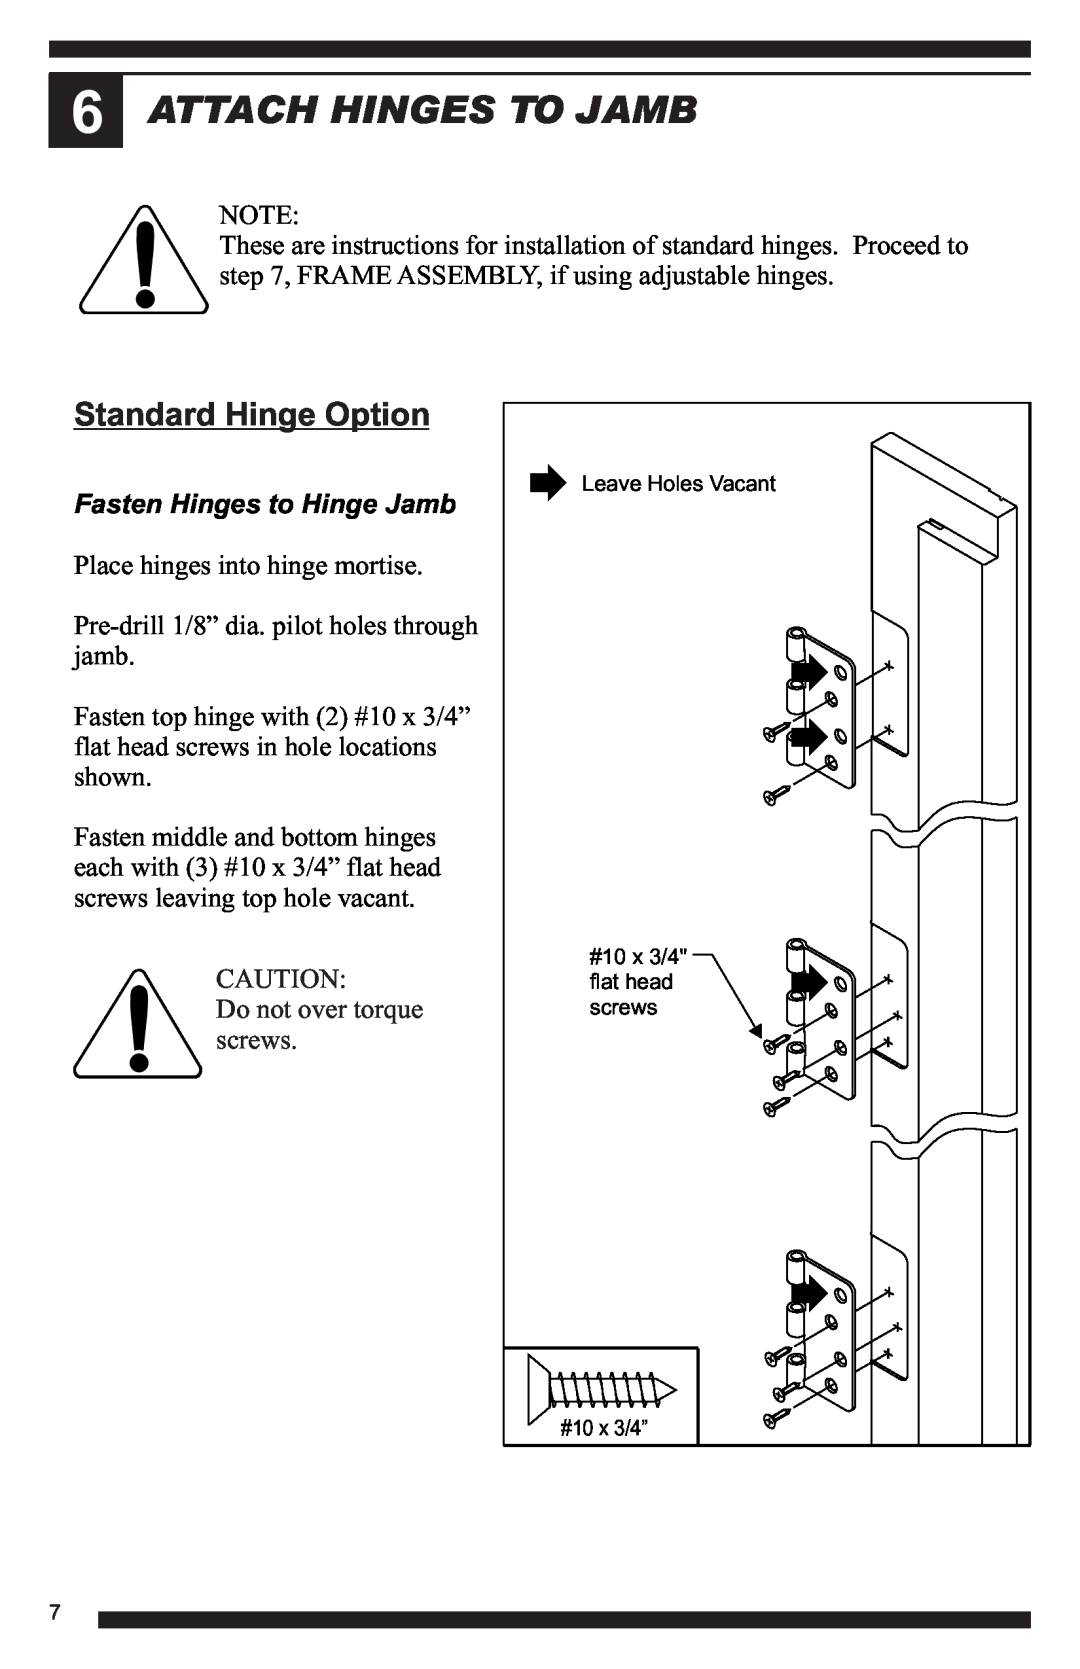 Therma-Tru Hinged Patio Door System Single Panel Assembly Unit manual Attach Hinges To Jamb, Standard Hinge Option 